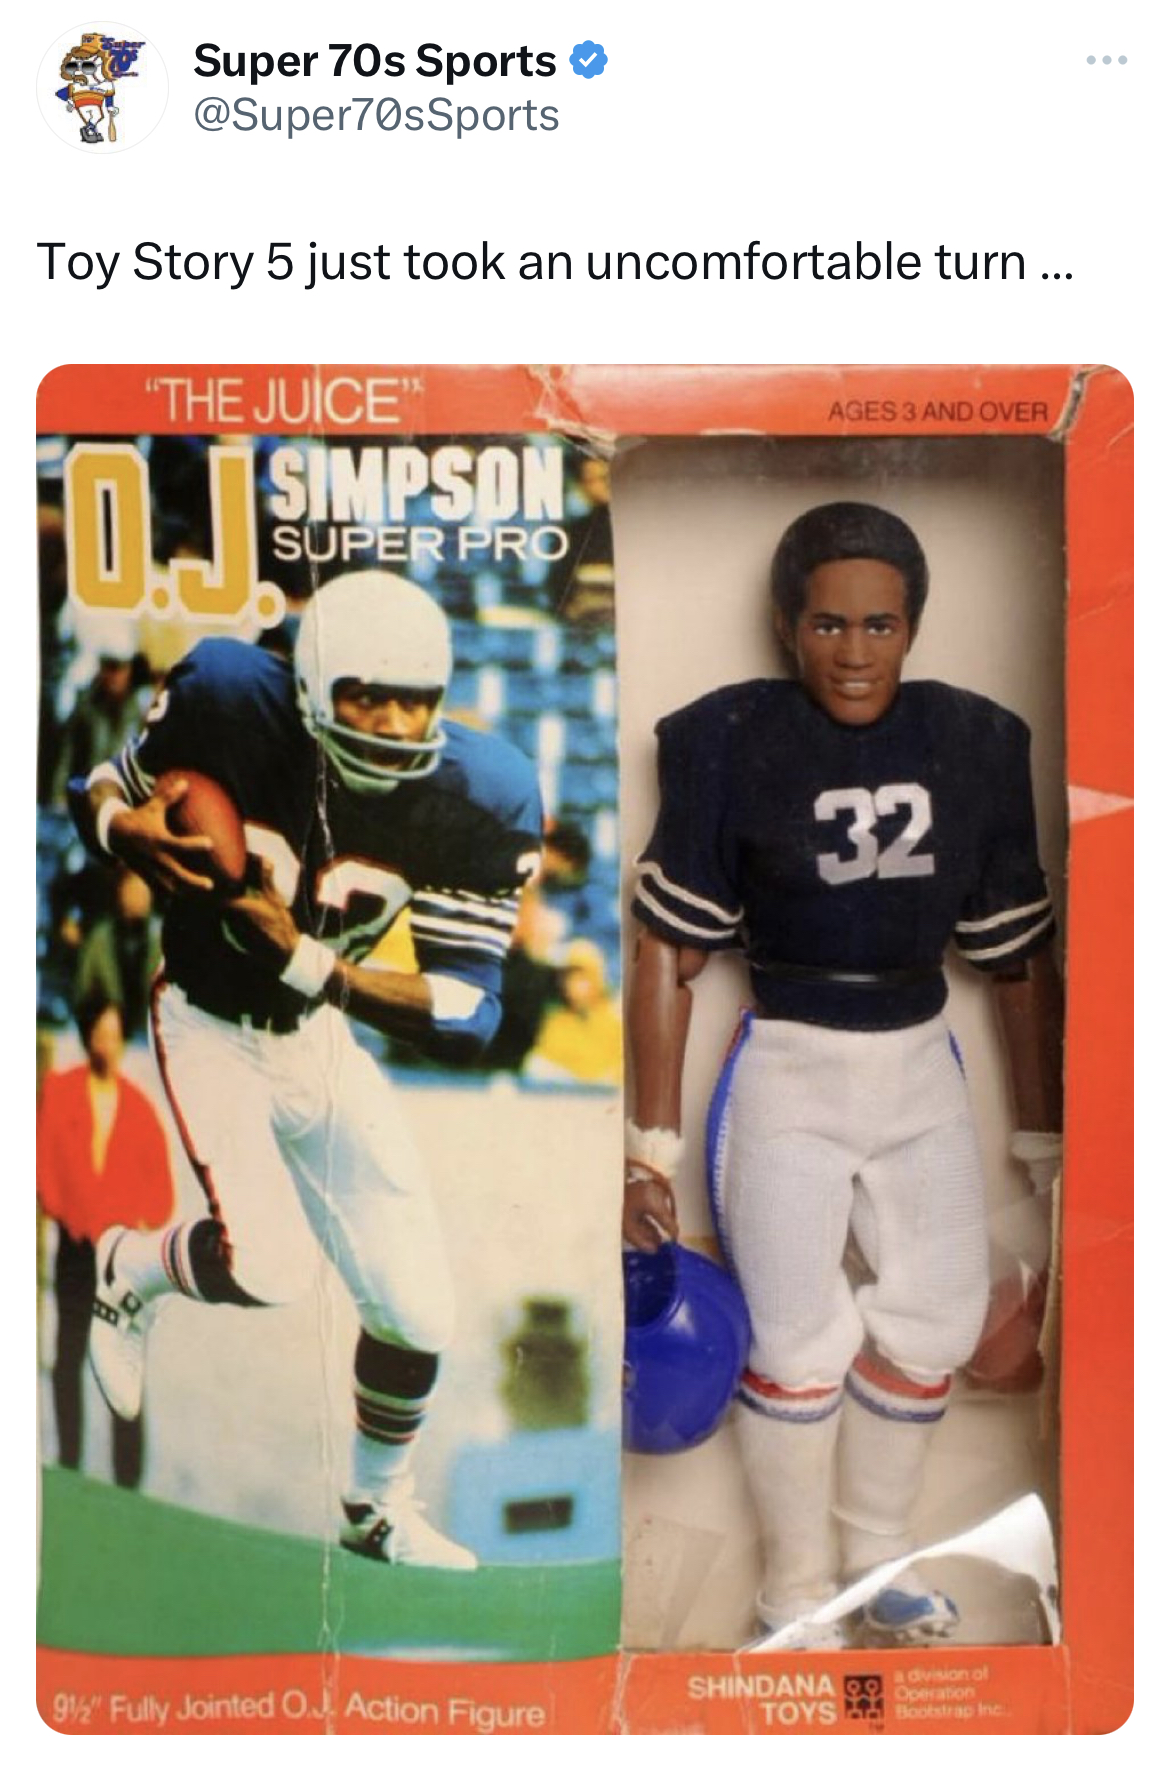 savage and absurd tweets - oj simpson action figure - Super 70s Sports Toy Story 5 just took an uncomfortable turn... The Juice Simpson Super Pro gly Fully Jointed O. Action Figure Adess And Over 32 Shindana Toys